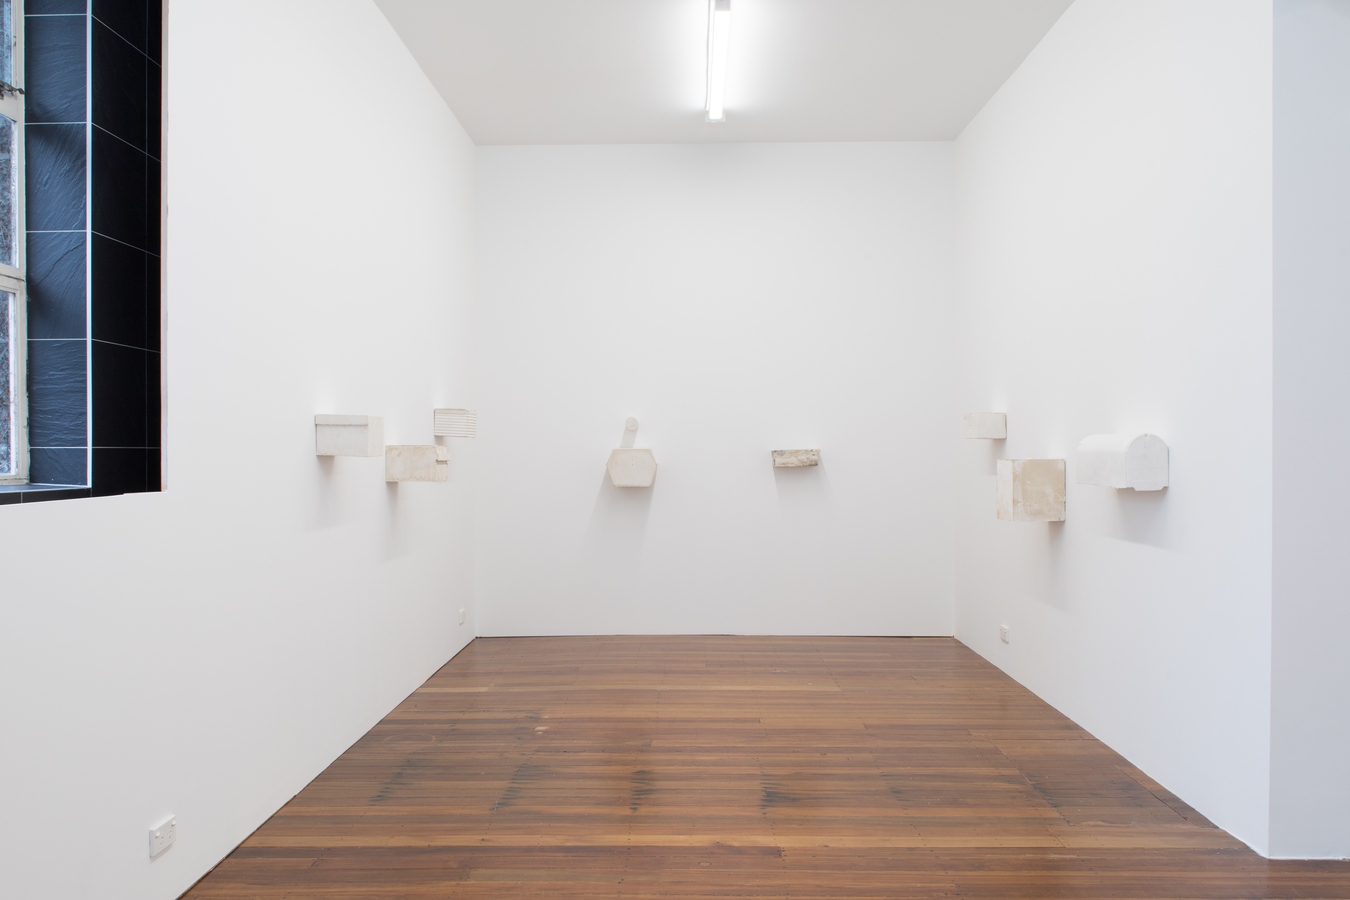 Image: Fiona Connor, Untitled (mailbox) #1-#8 (installation view), 2021. Photo: Janneth Gil.